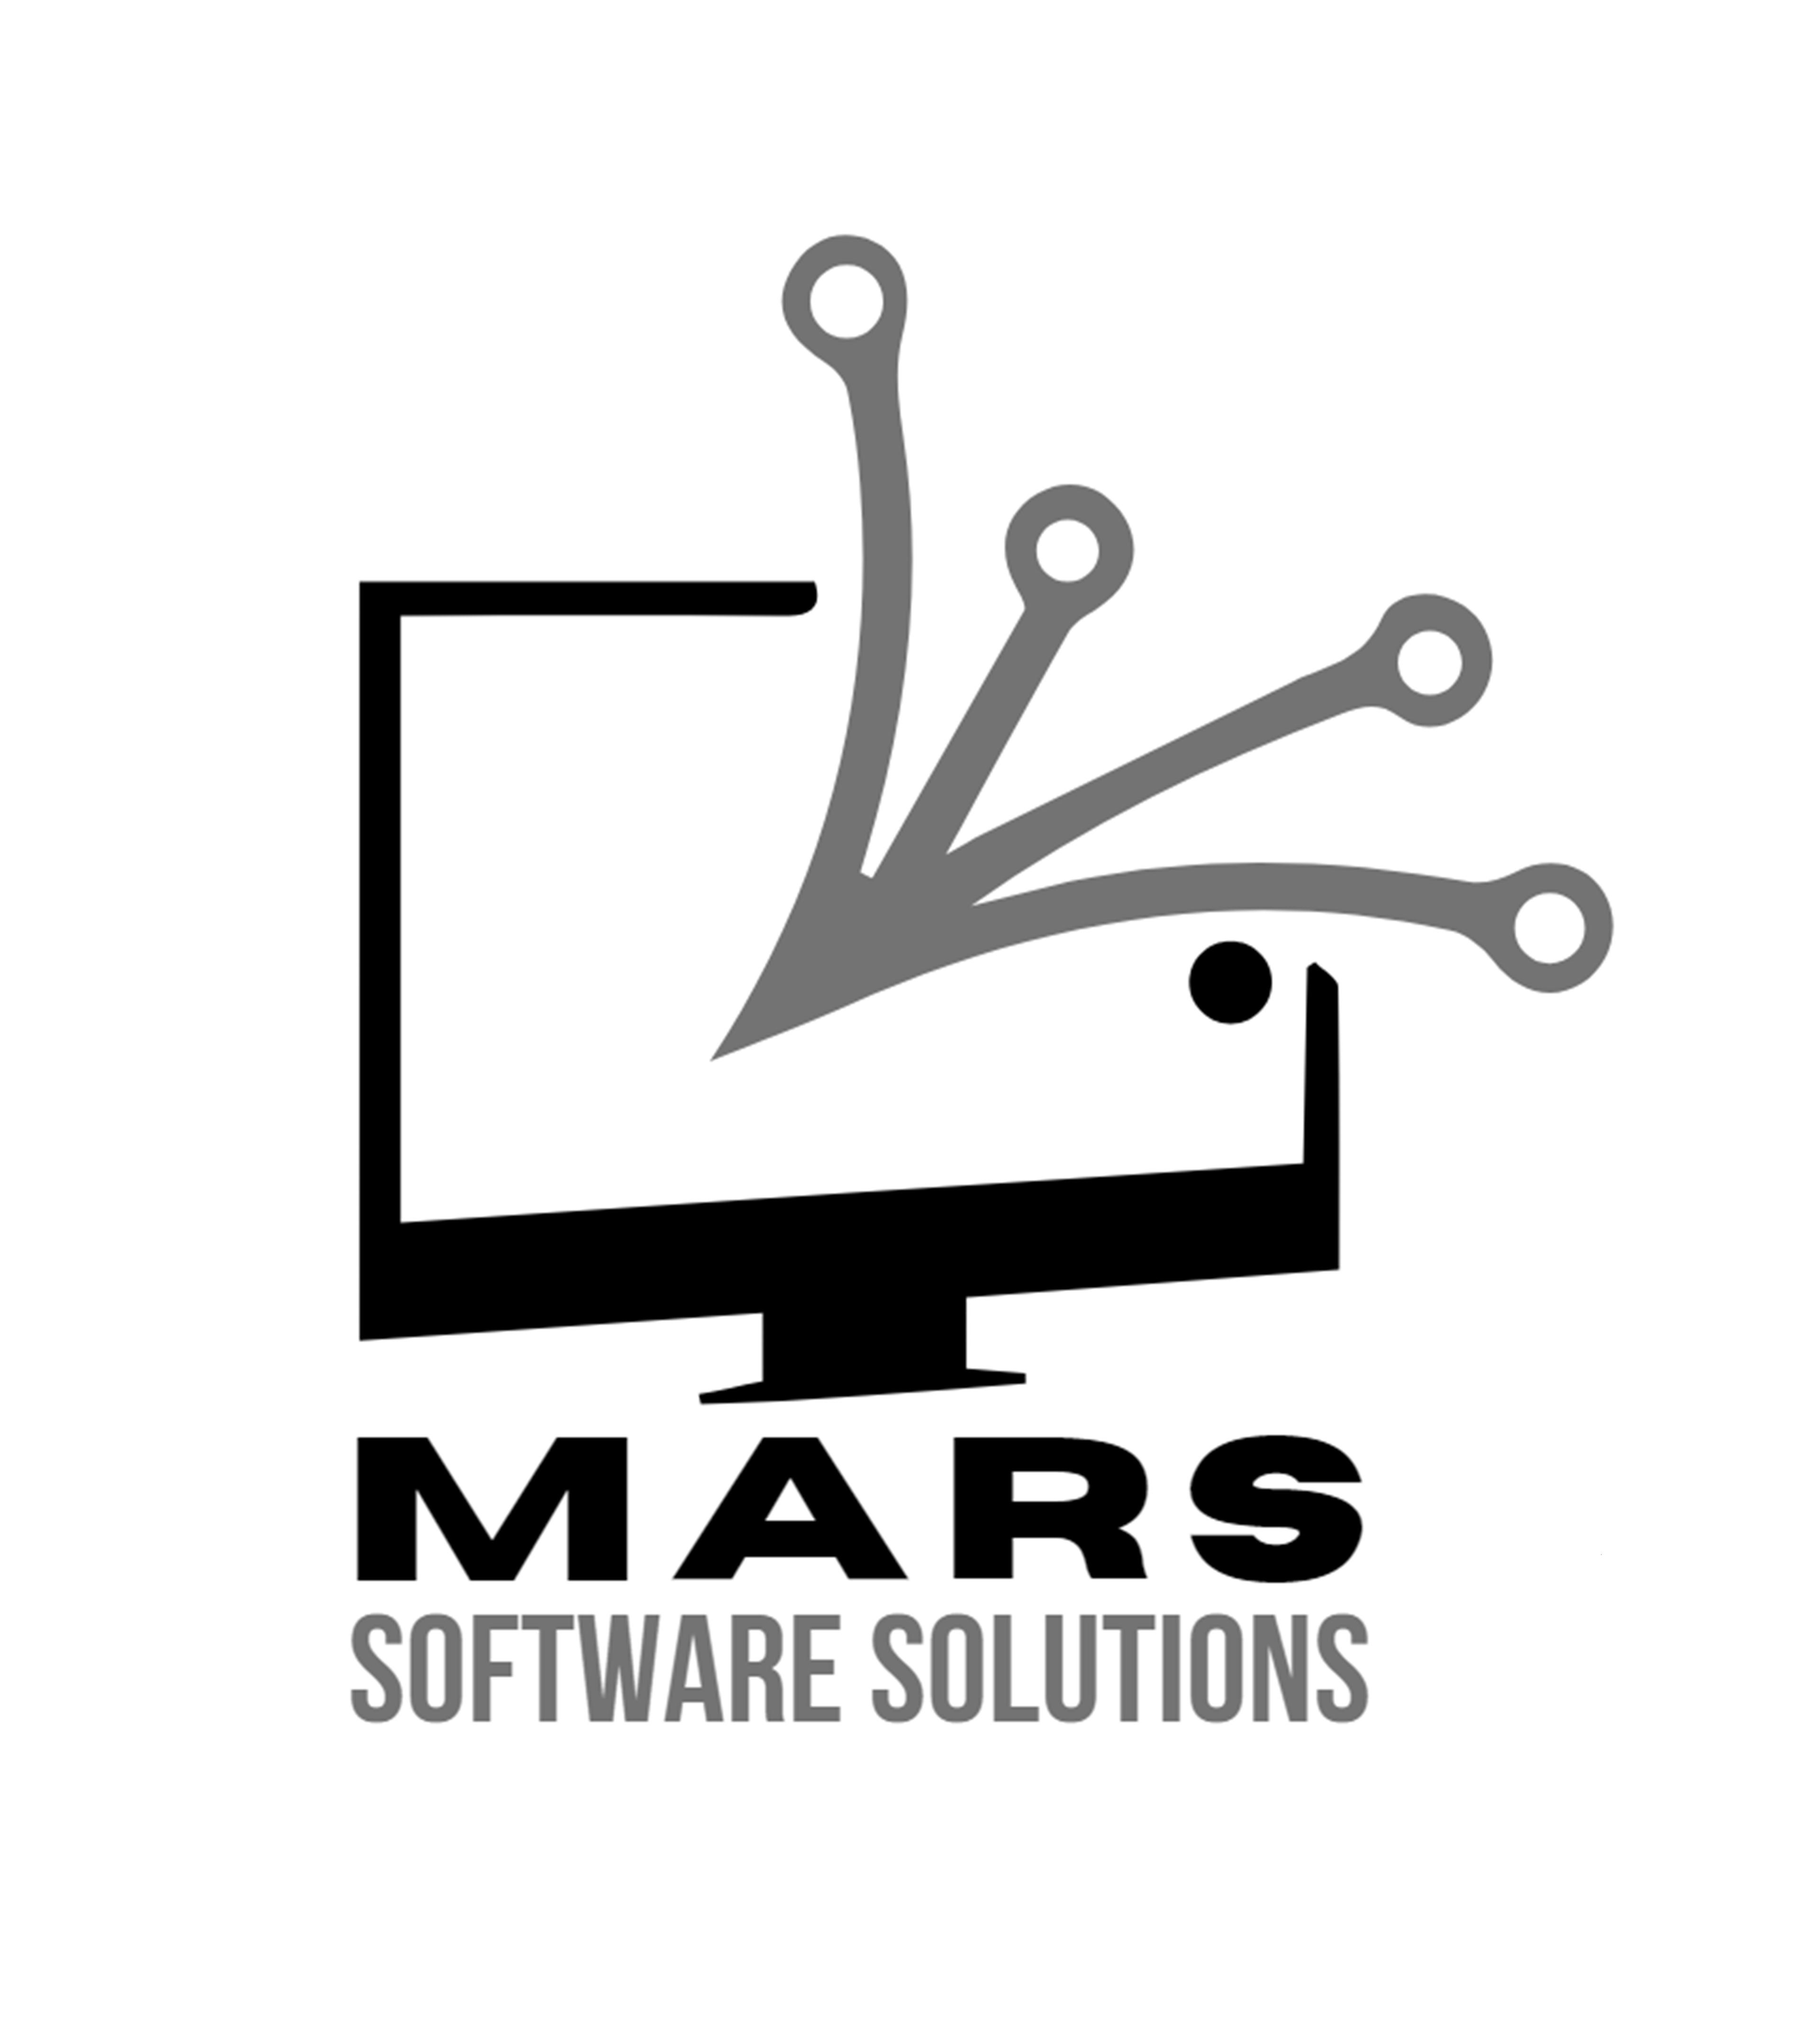 MARS SOFTWARE SOLUTIONS